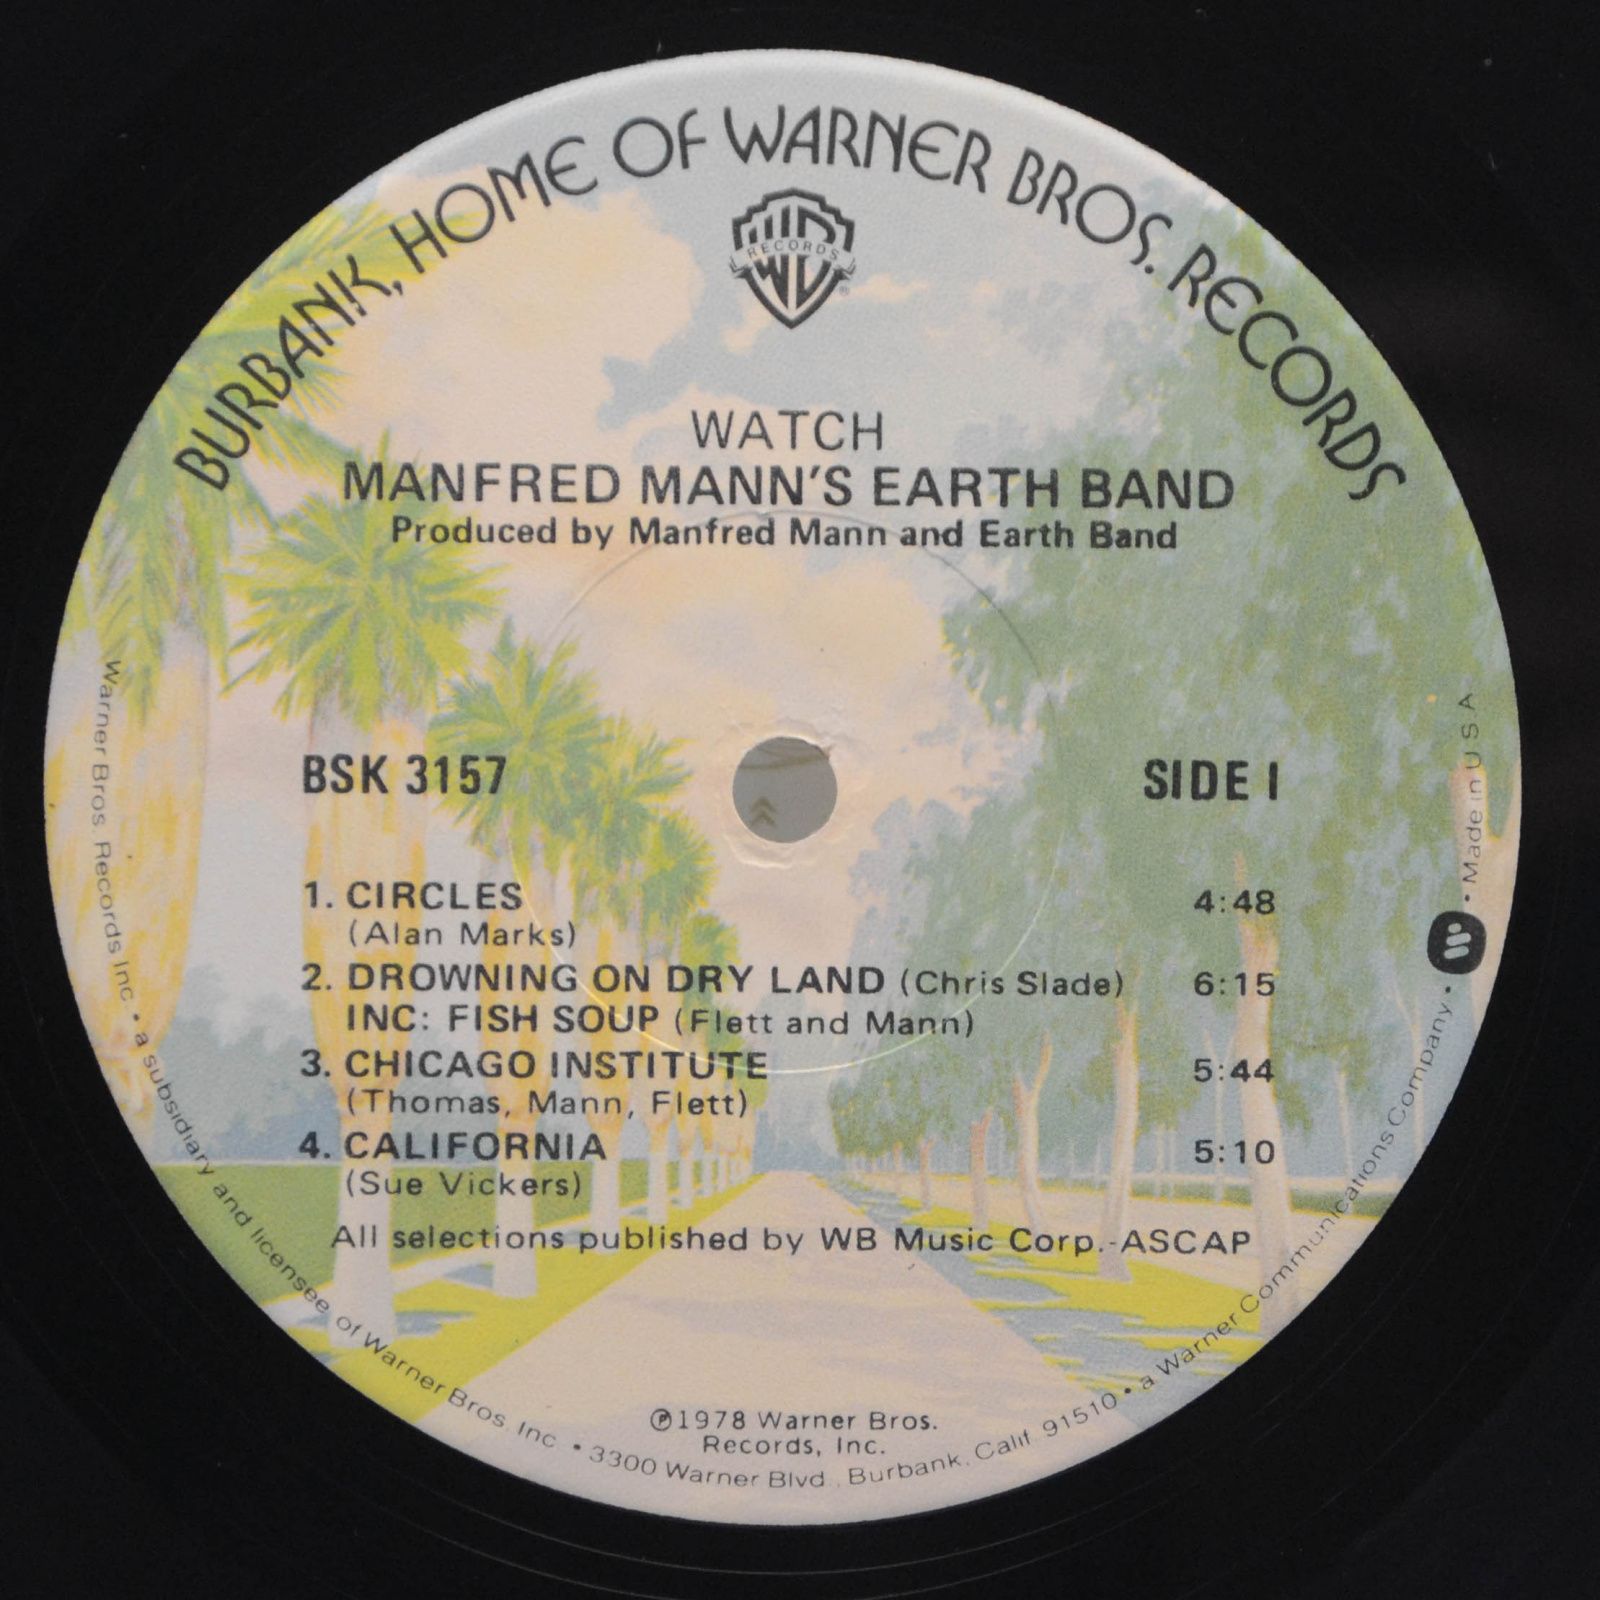 Manfred Mann's Earth Band — Watch (USA), 1978